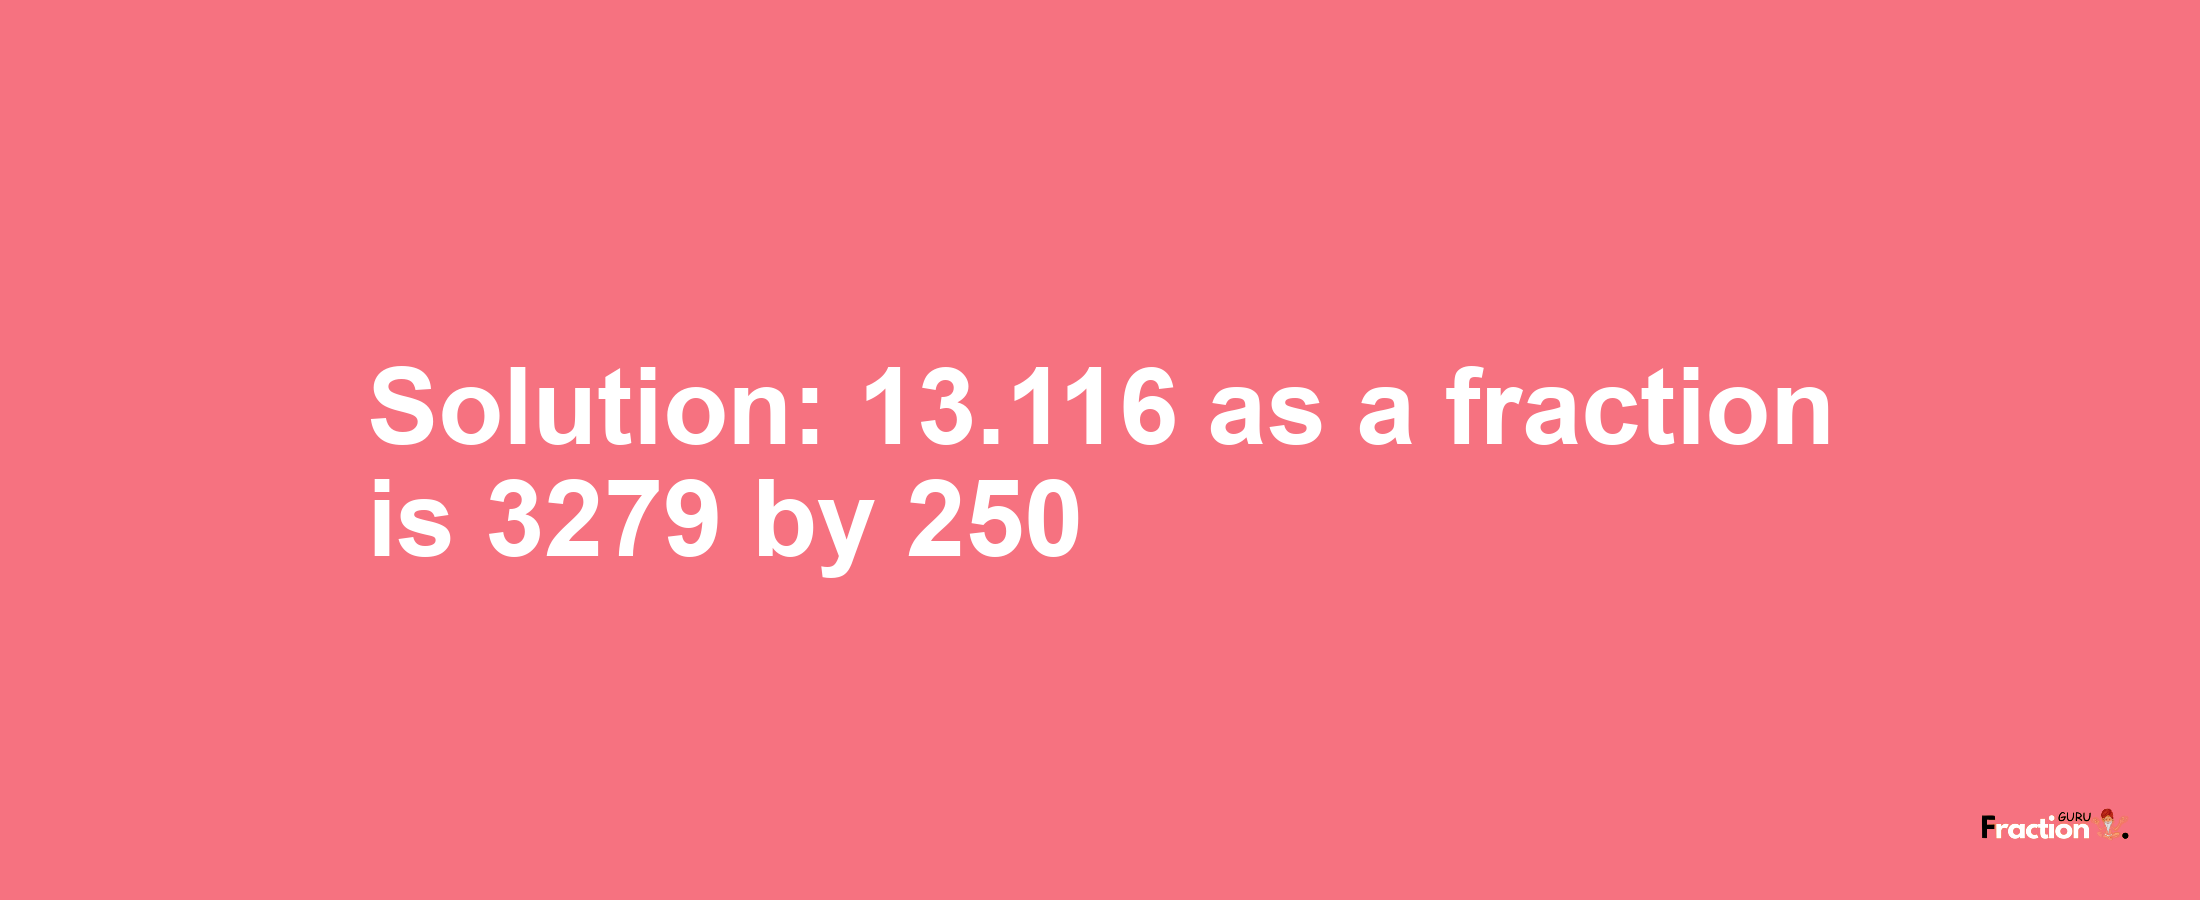 Solution:13.116 as a fraction is 3279/250